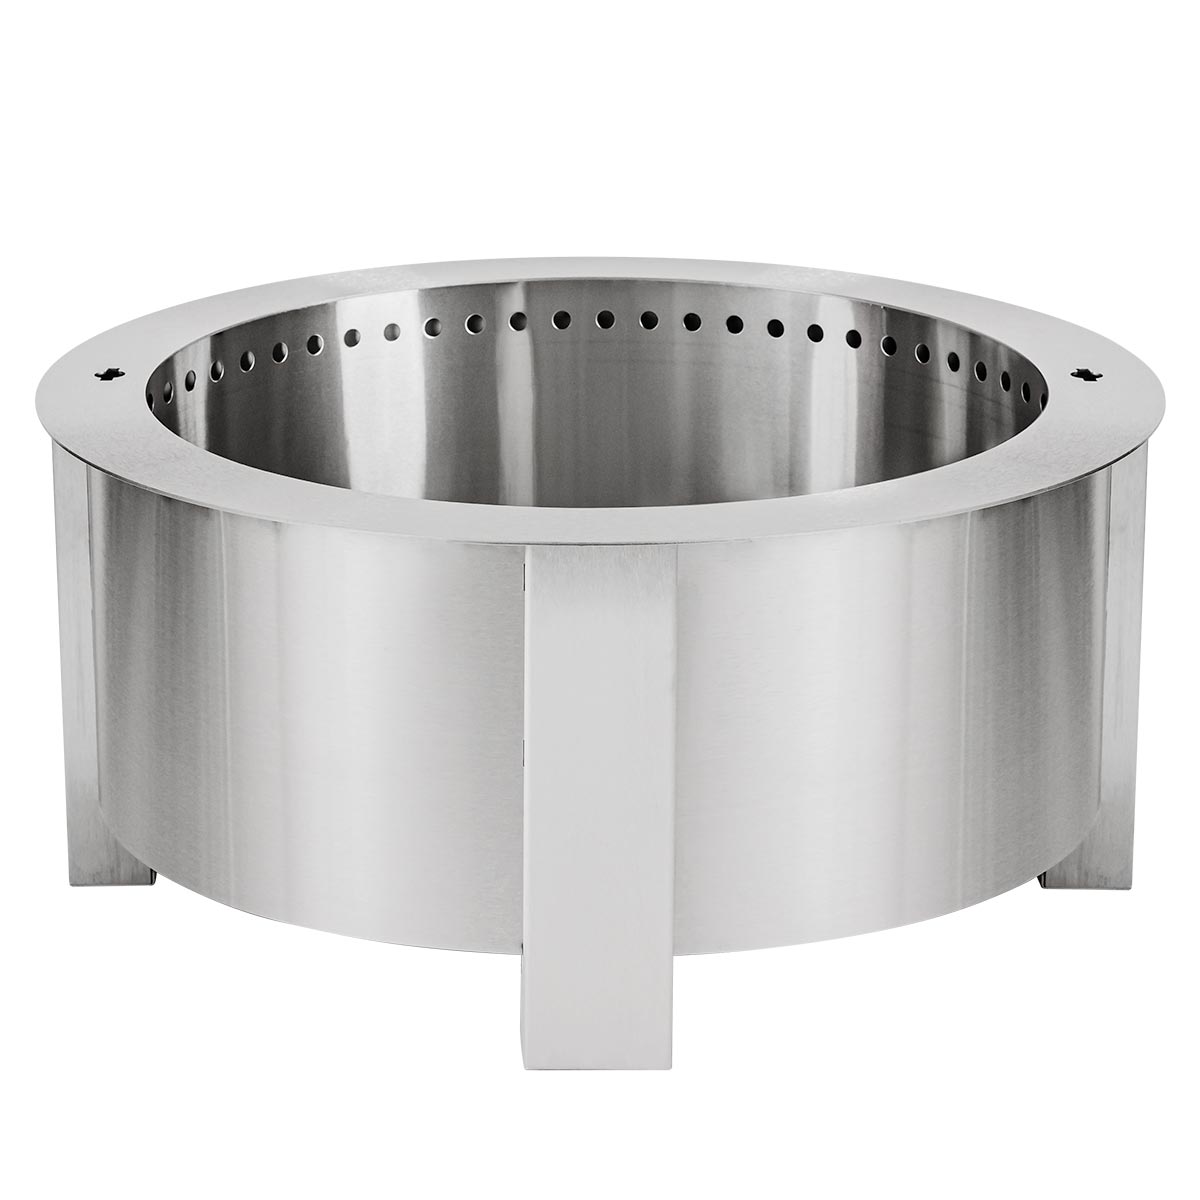 BREEO X Series 30 Smokeless Fire Pit (Stainless) with Ash Removal Tool